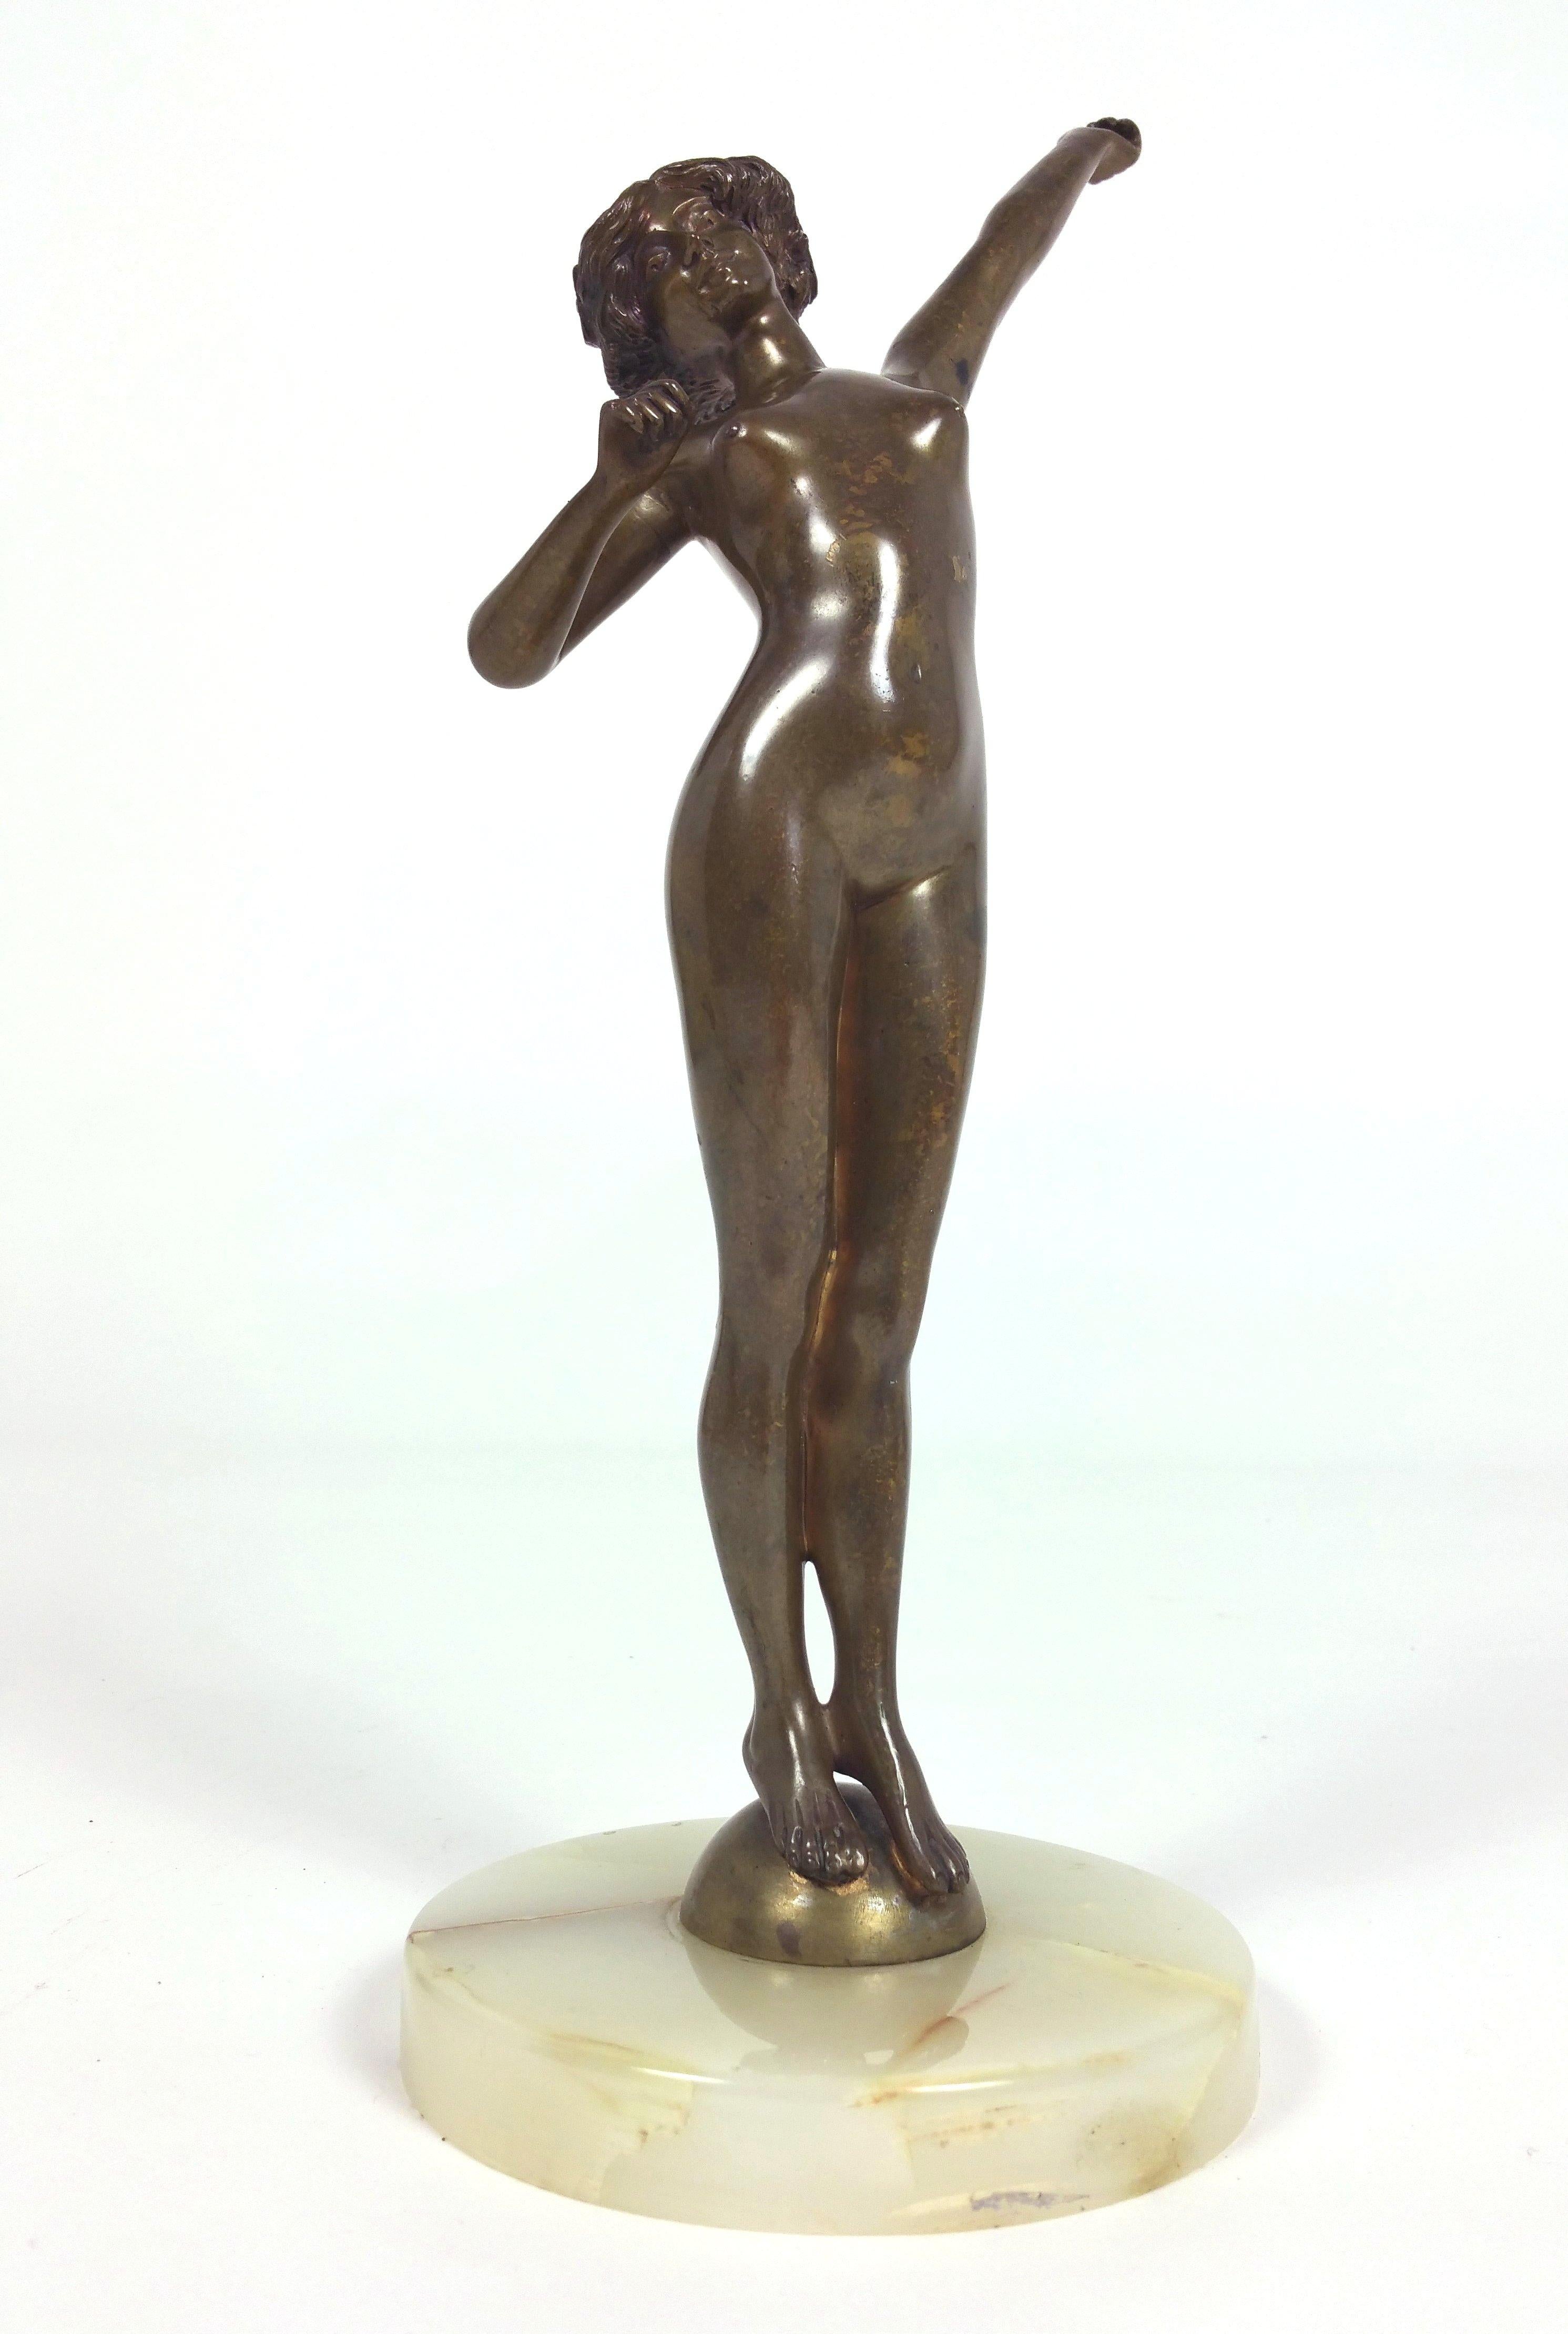 This graceful and delicately poised Art Deco bronze sculpture depicts an attractive nude maiden in a languidly upright outstretched position. The sculpture is titled ‘Awakening’ and rests on an onyx base, which is unsigned. It measures 5 in – 12.7